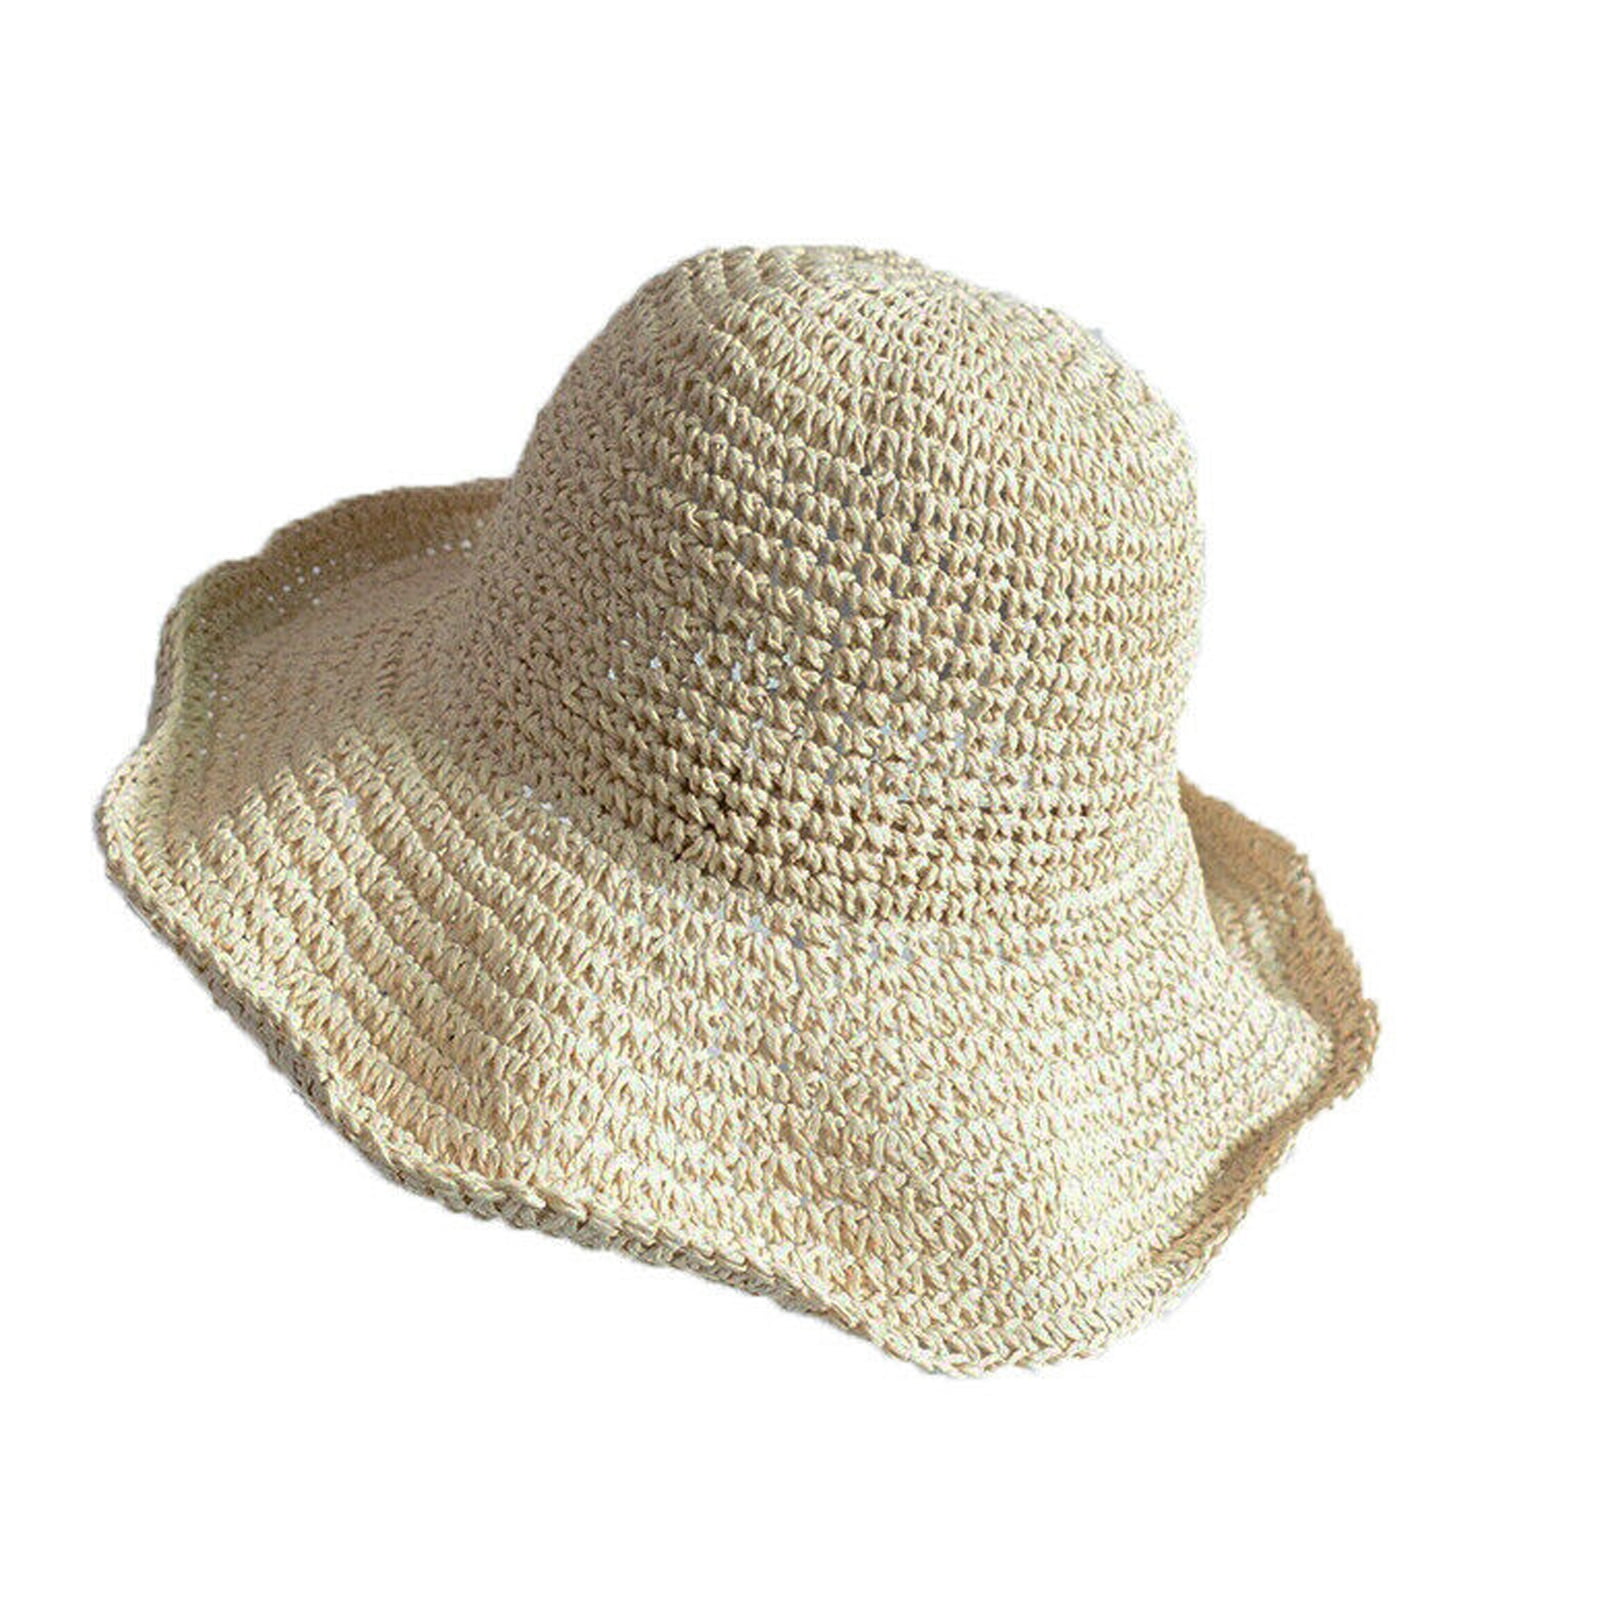 Women Foldable Wide Large Brim Floppy Beach Hat Sun Straw Hat Cap Gift,White,United States,One Size